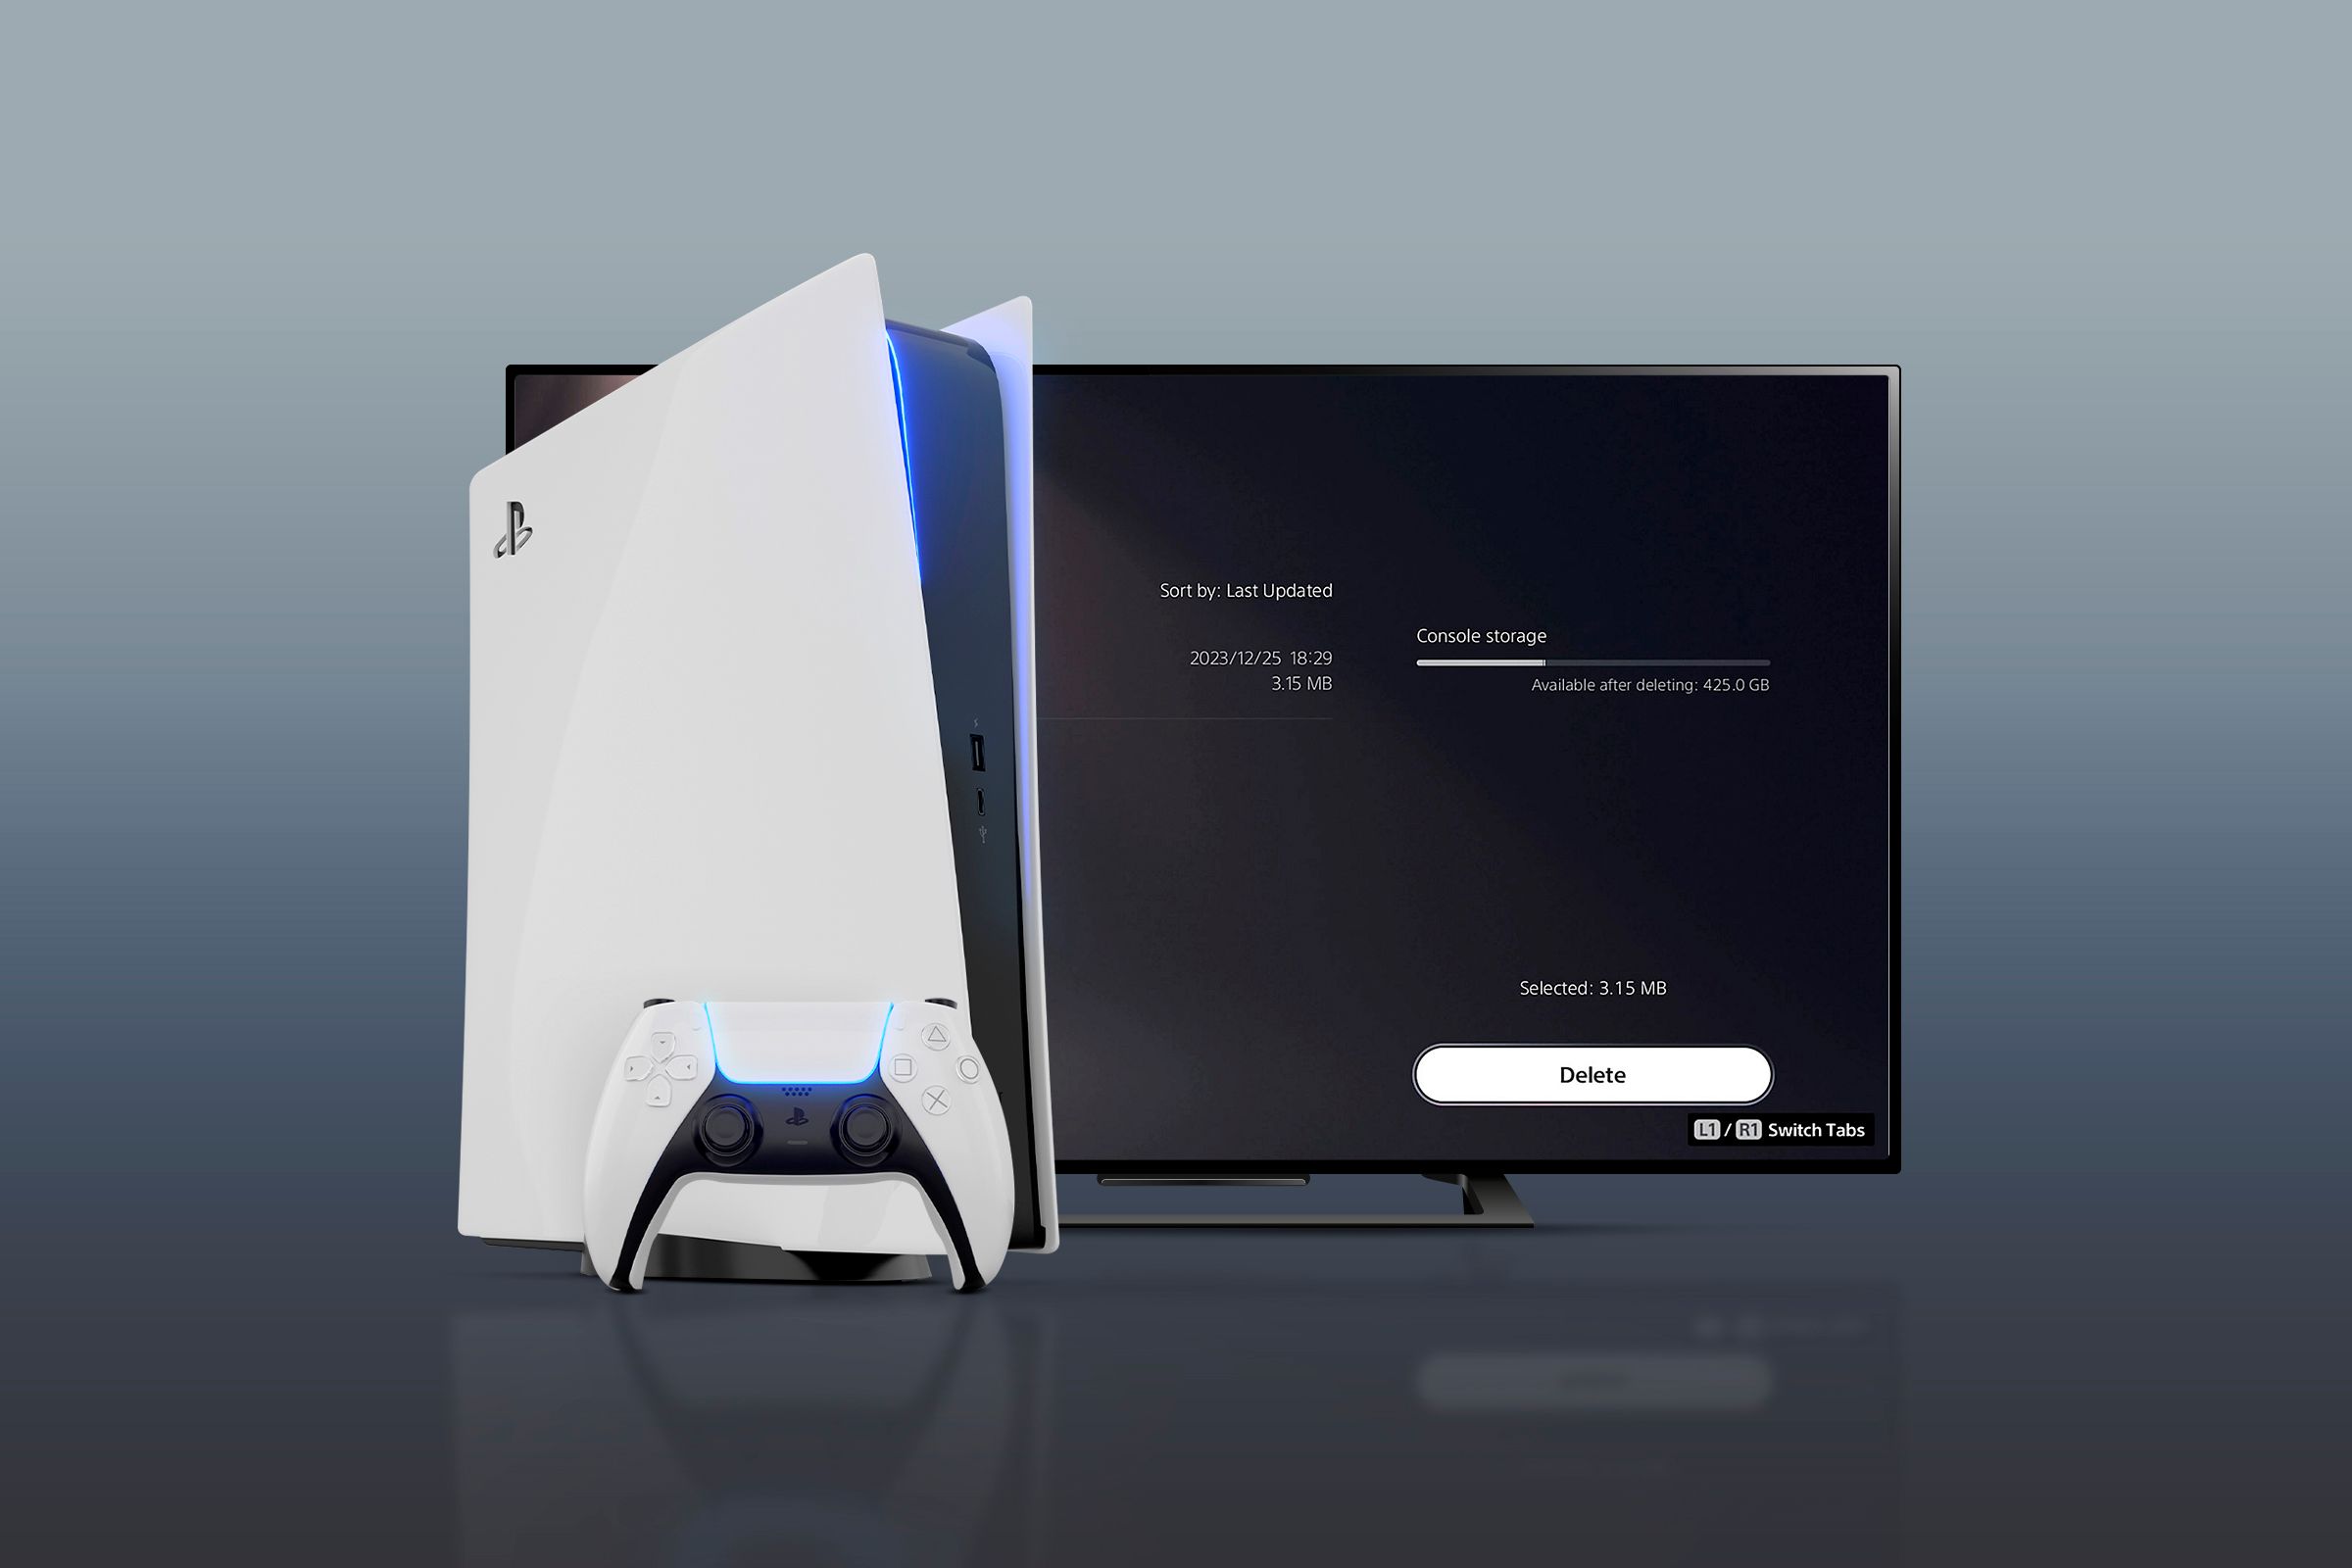 A PS5 with a DualSense in front of it and a TV with the storage screen, behind the PS5